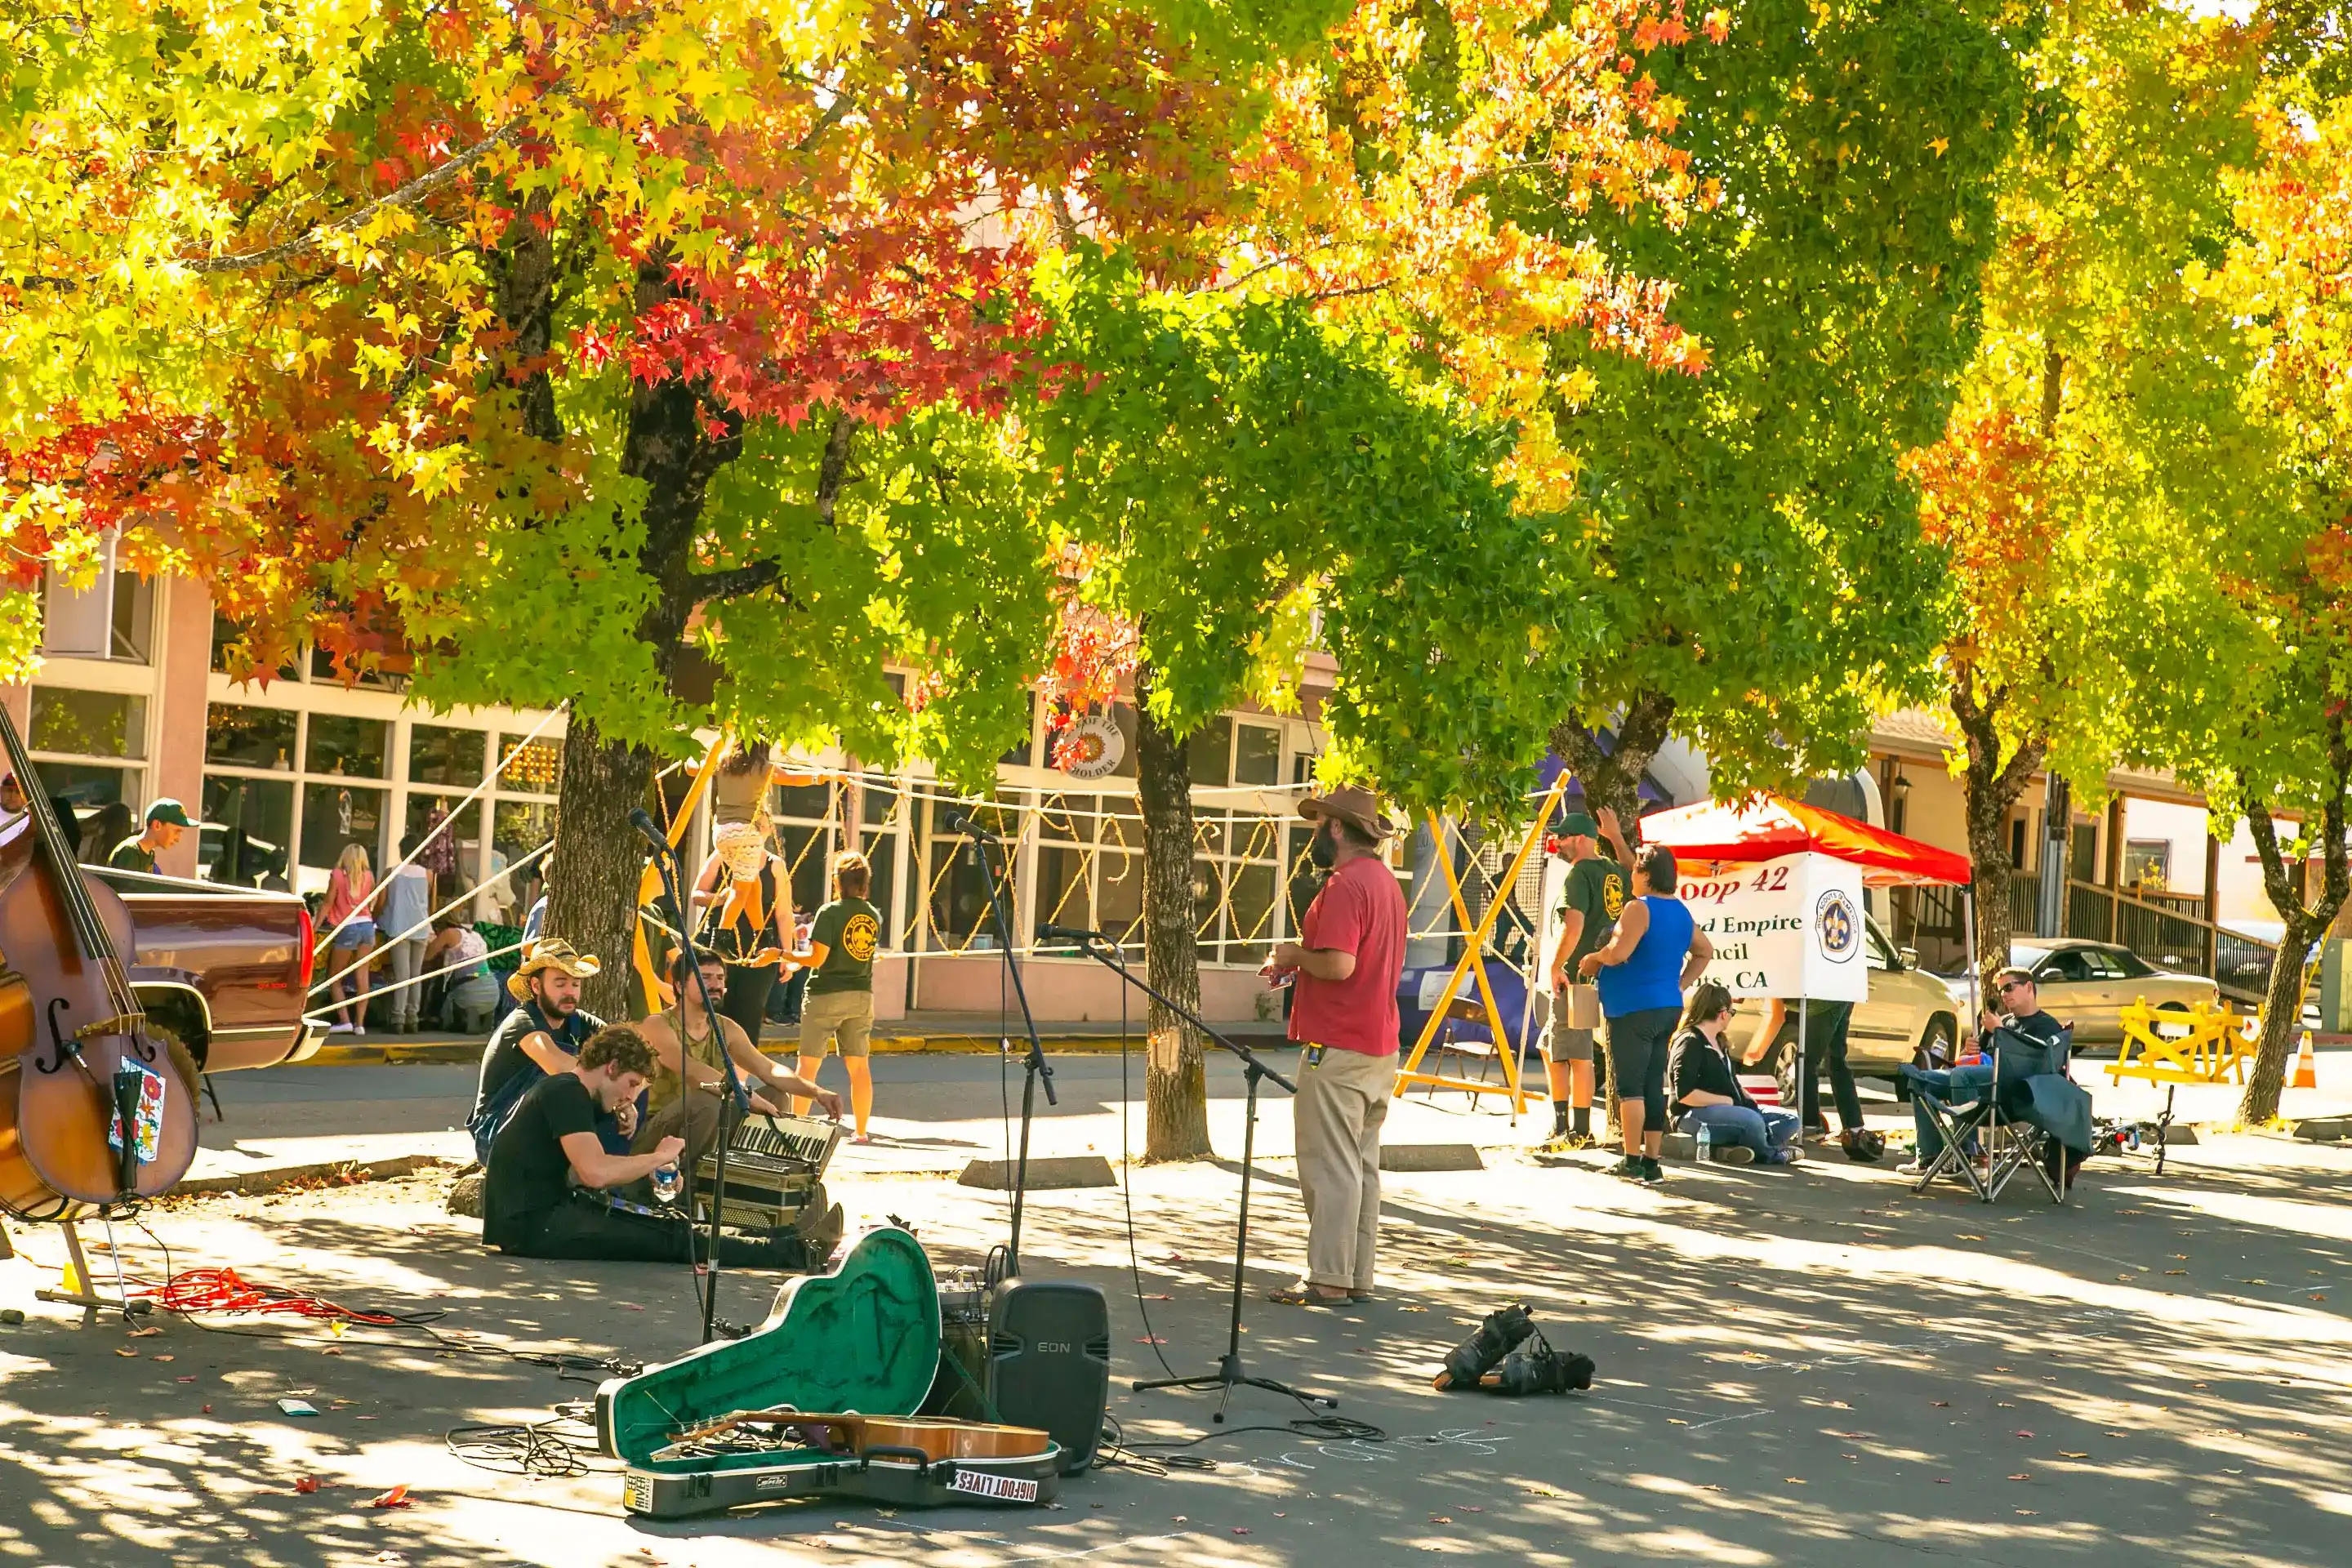 8 October 2016 Ukiah California, USA. Music street event in the weekend in downtown Ukiah with bands and colourful trees around